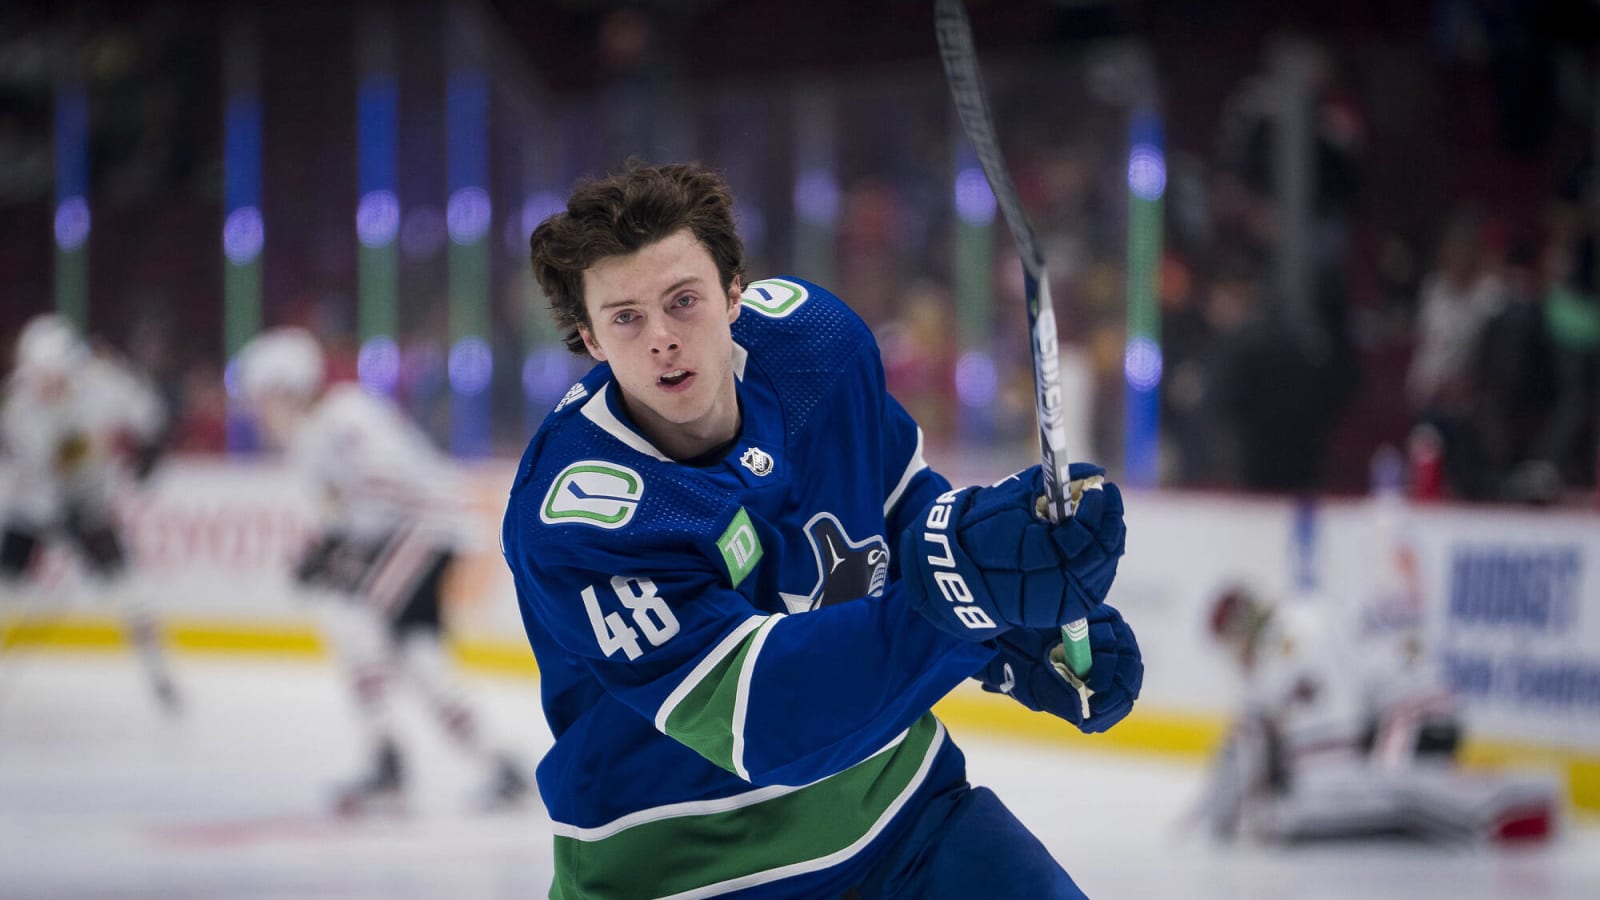 Canucks’ McWard Performing Well In First Preseason